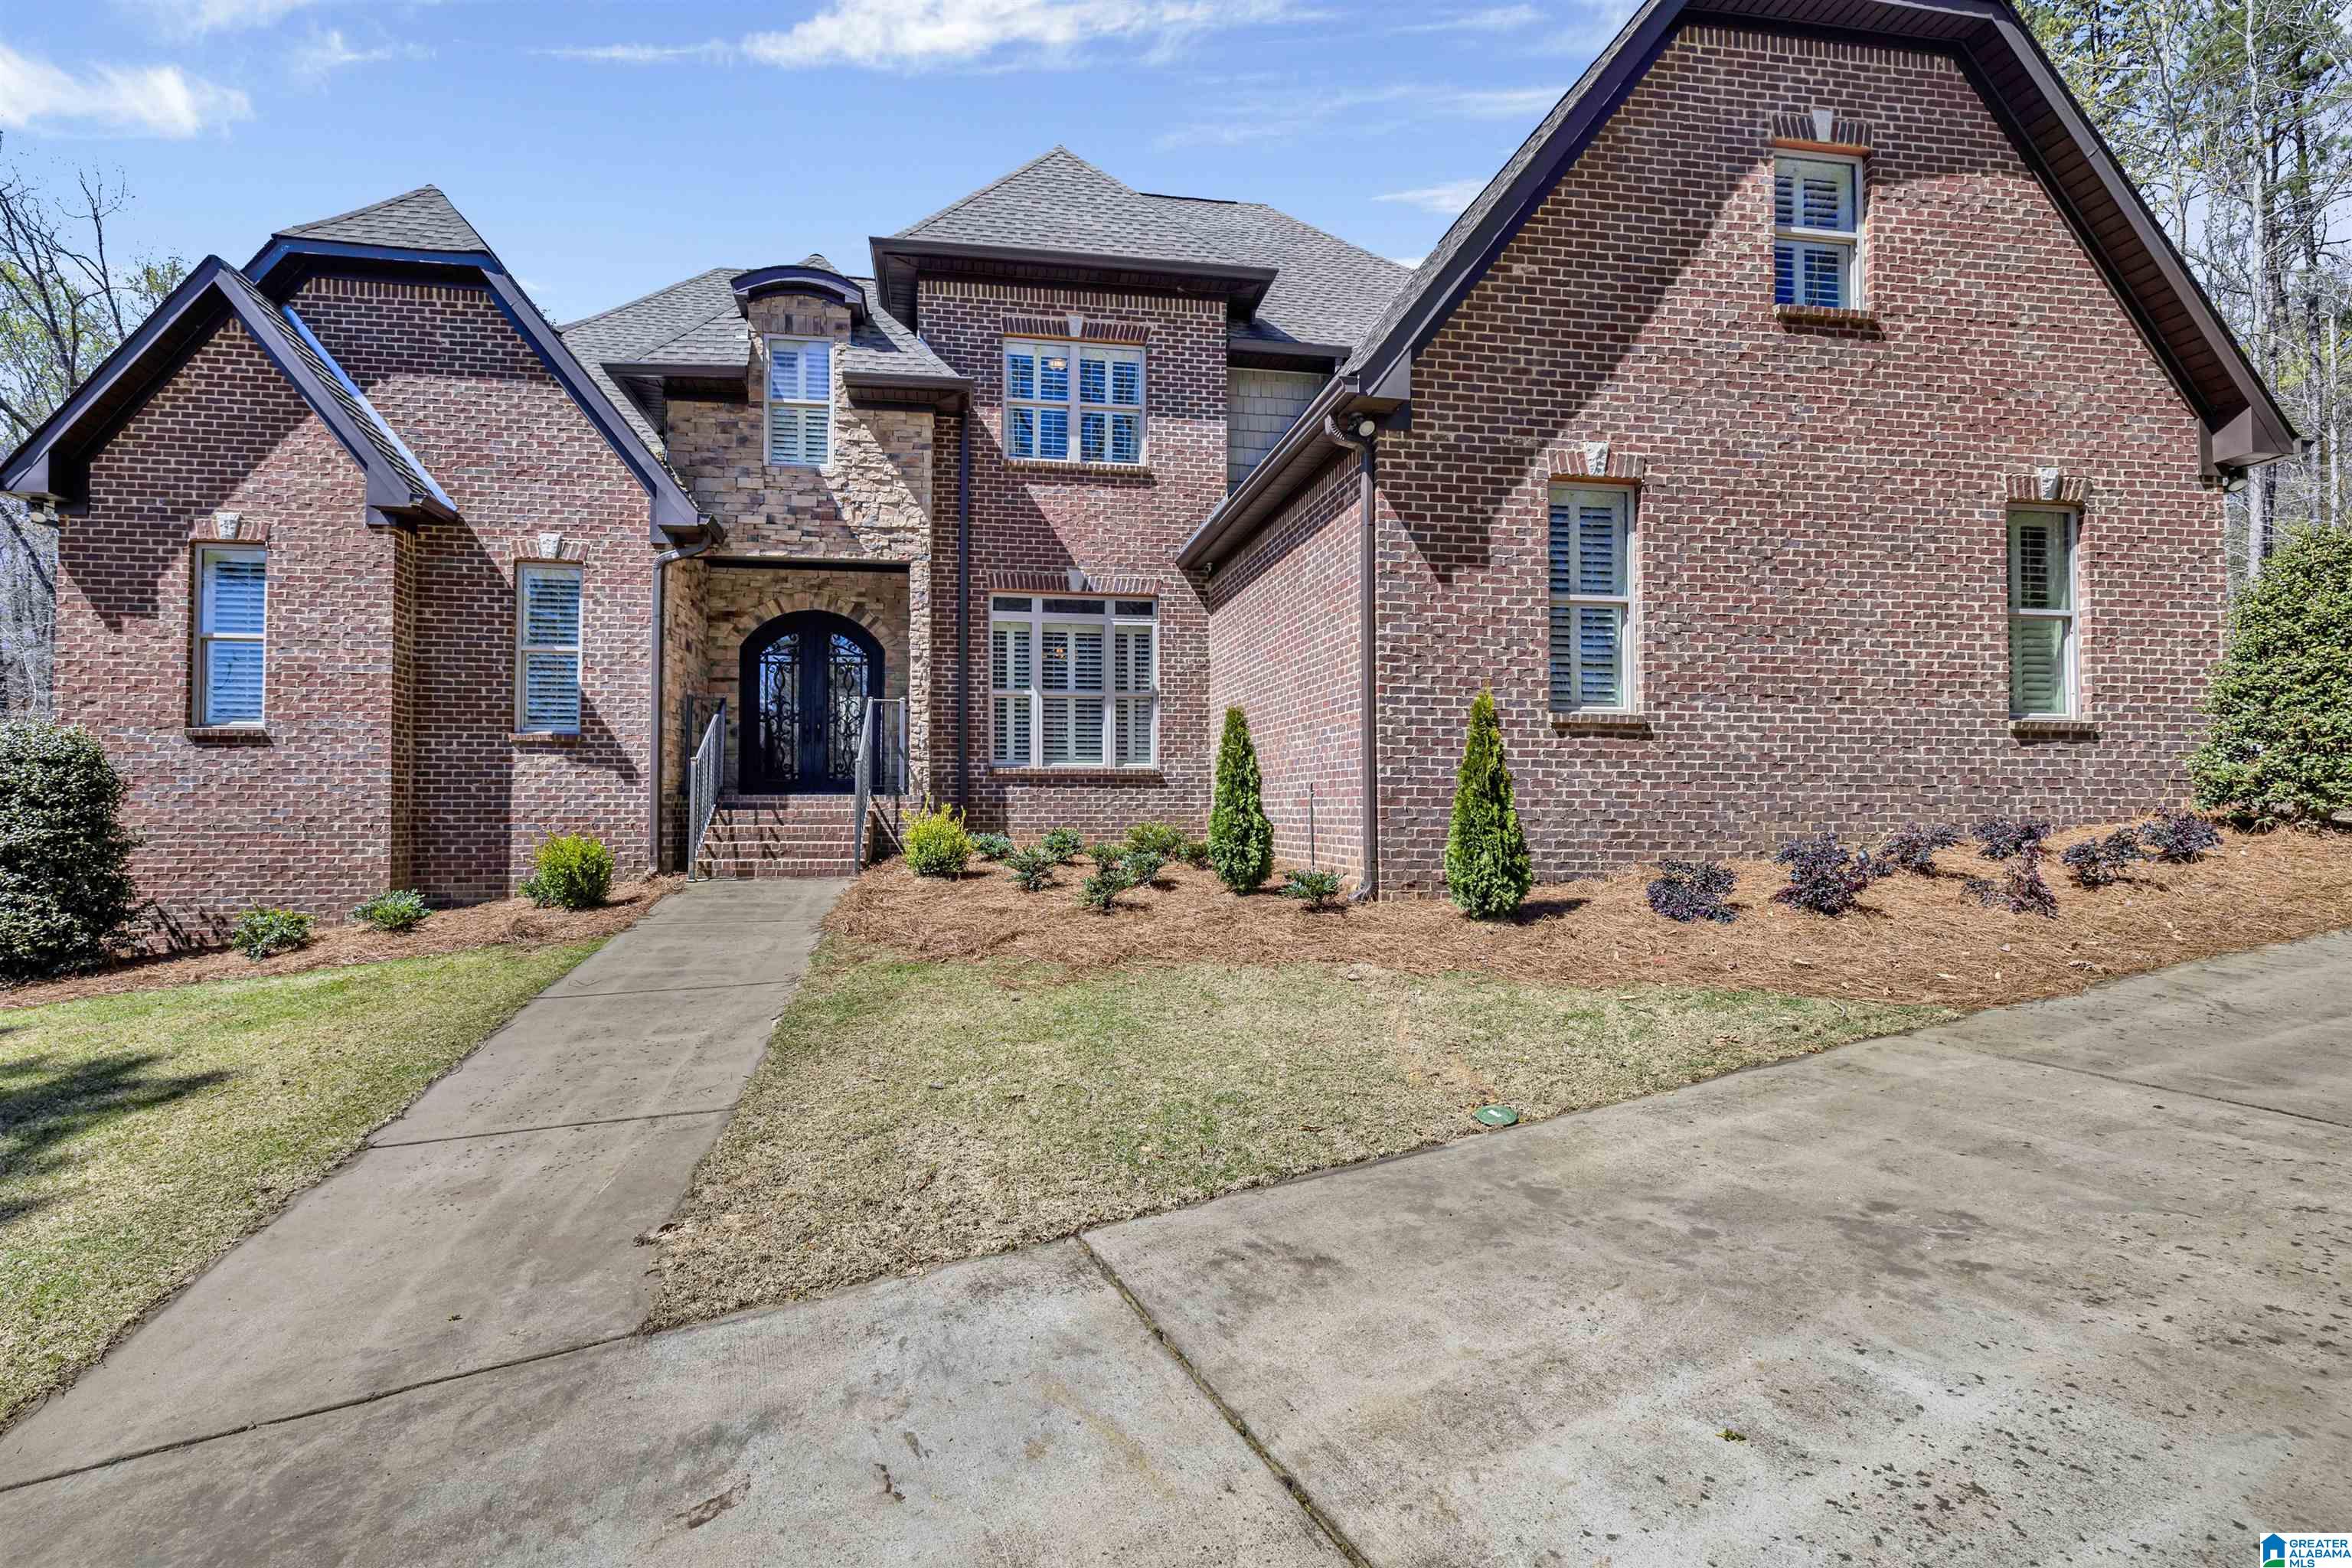 Custom full brick built home in Carrington with tons of parking. This is a must see from the stone wood-burning fireplace, custom kitchen, huge bedrooms/closets to your own sanctuary with the salt water pool in the back yard.  The downstairs has 1900 sq. ft. finished with a full bathroom and storage.  Get your showings in for this one because it will amaze the buyers!!